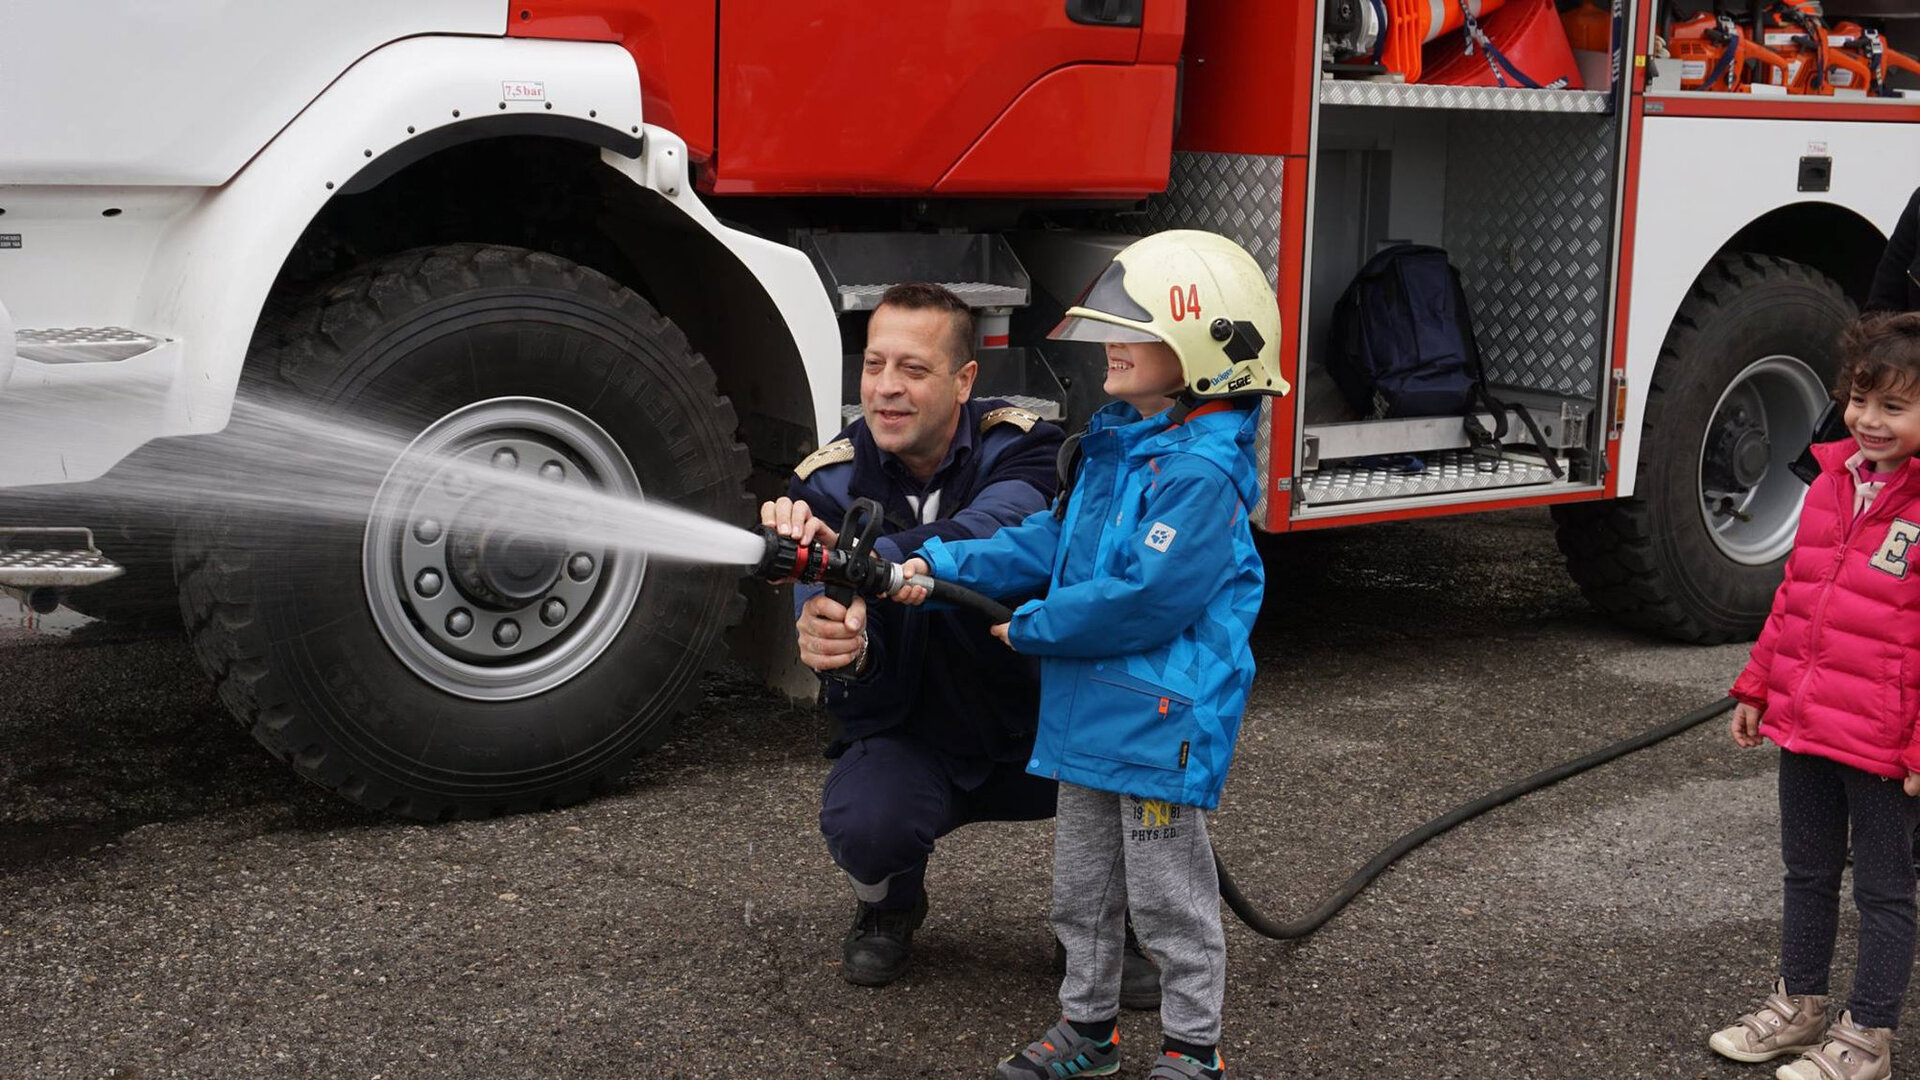 Adventure at the Fire Safety Station